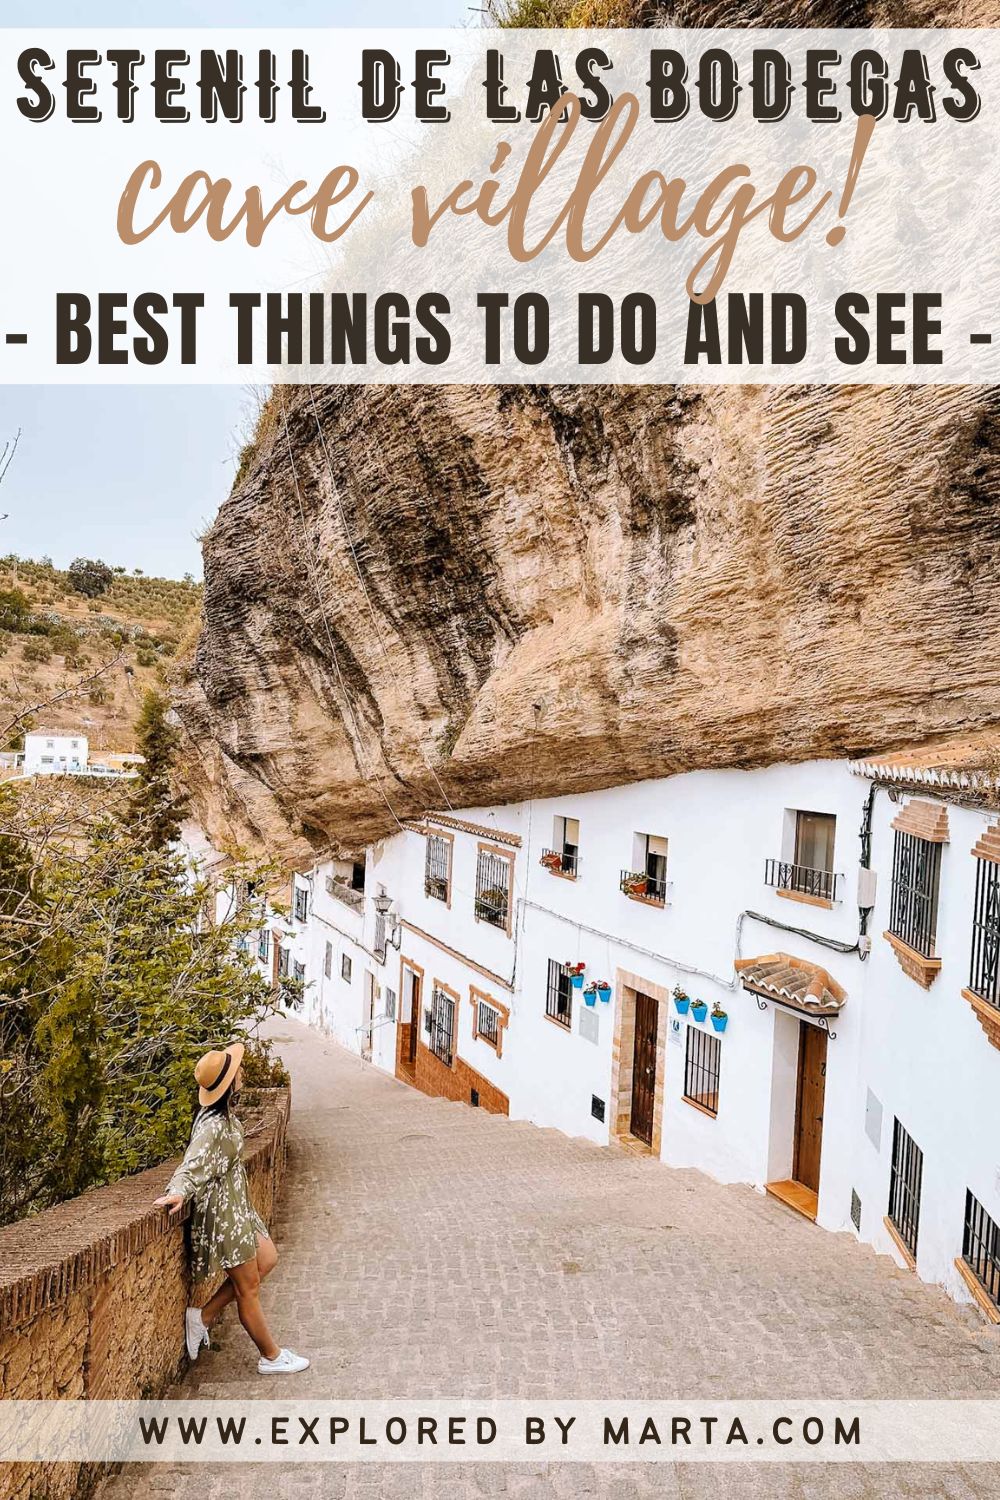 Amazing things to do and visit in Setenil de las Bodegas, Spain